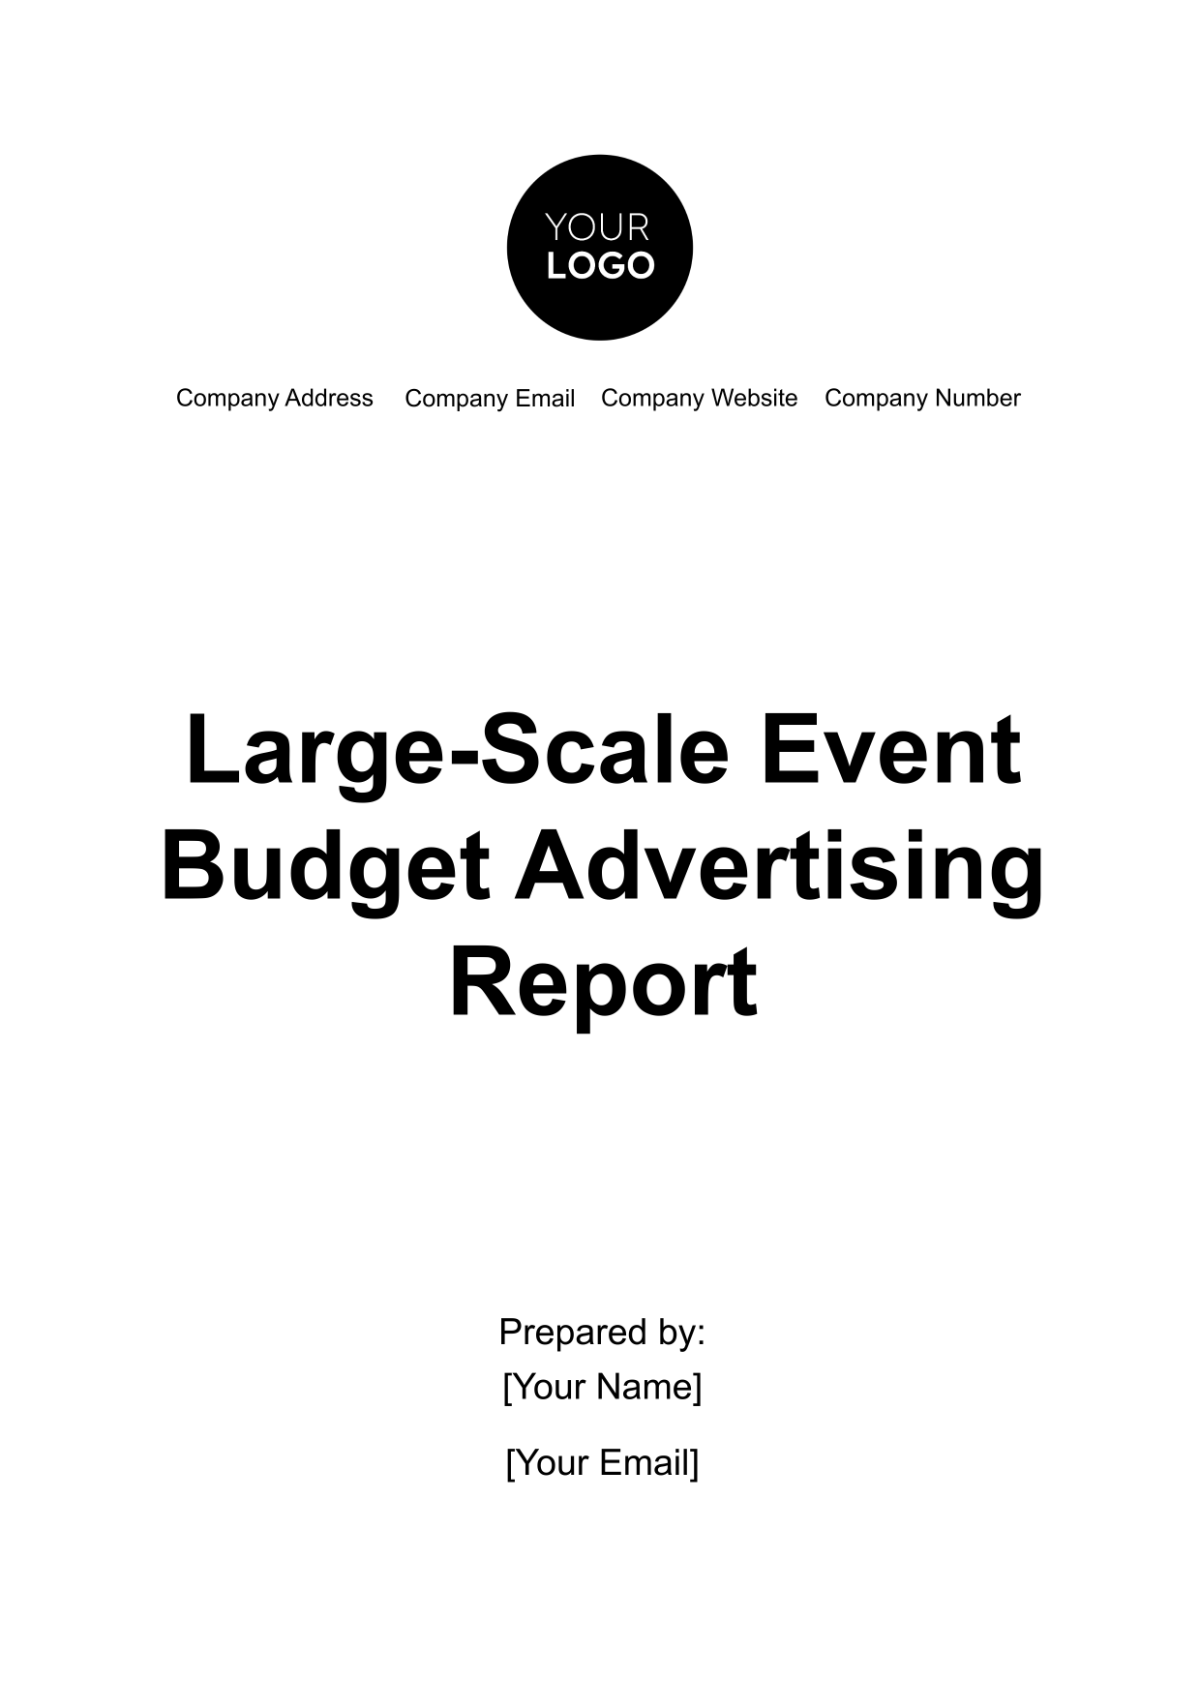 Free Large-Scale Event Budget Advertising Report Template